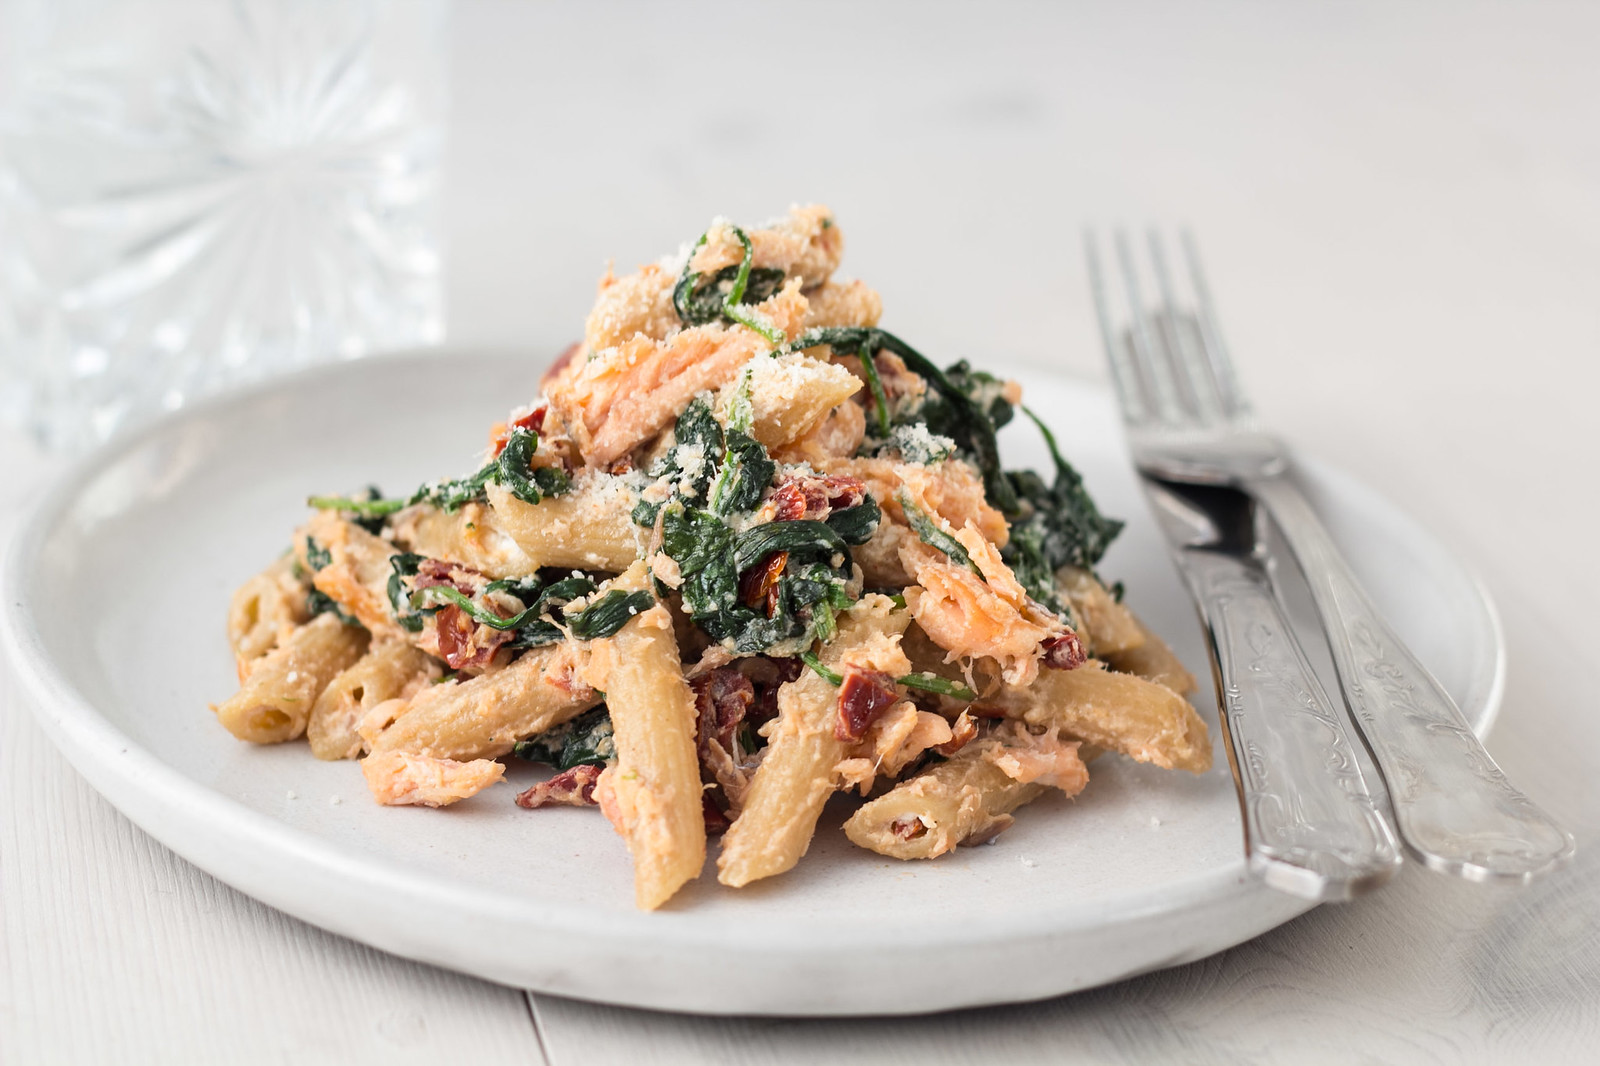 Salmon, Spinach and Ricotta Cheese Pasta